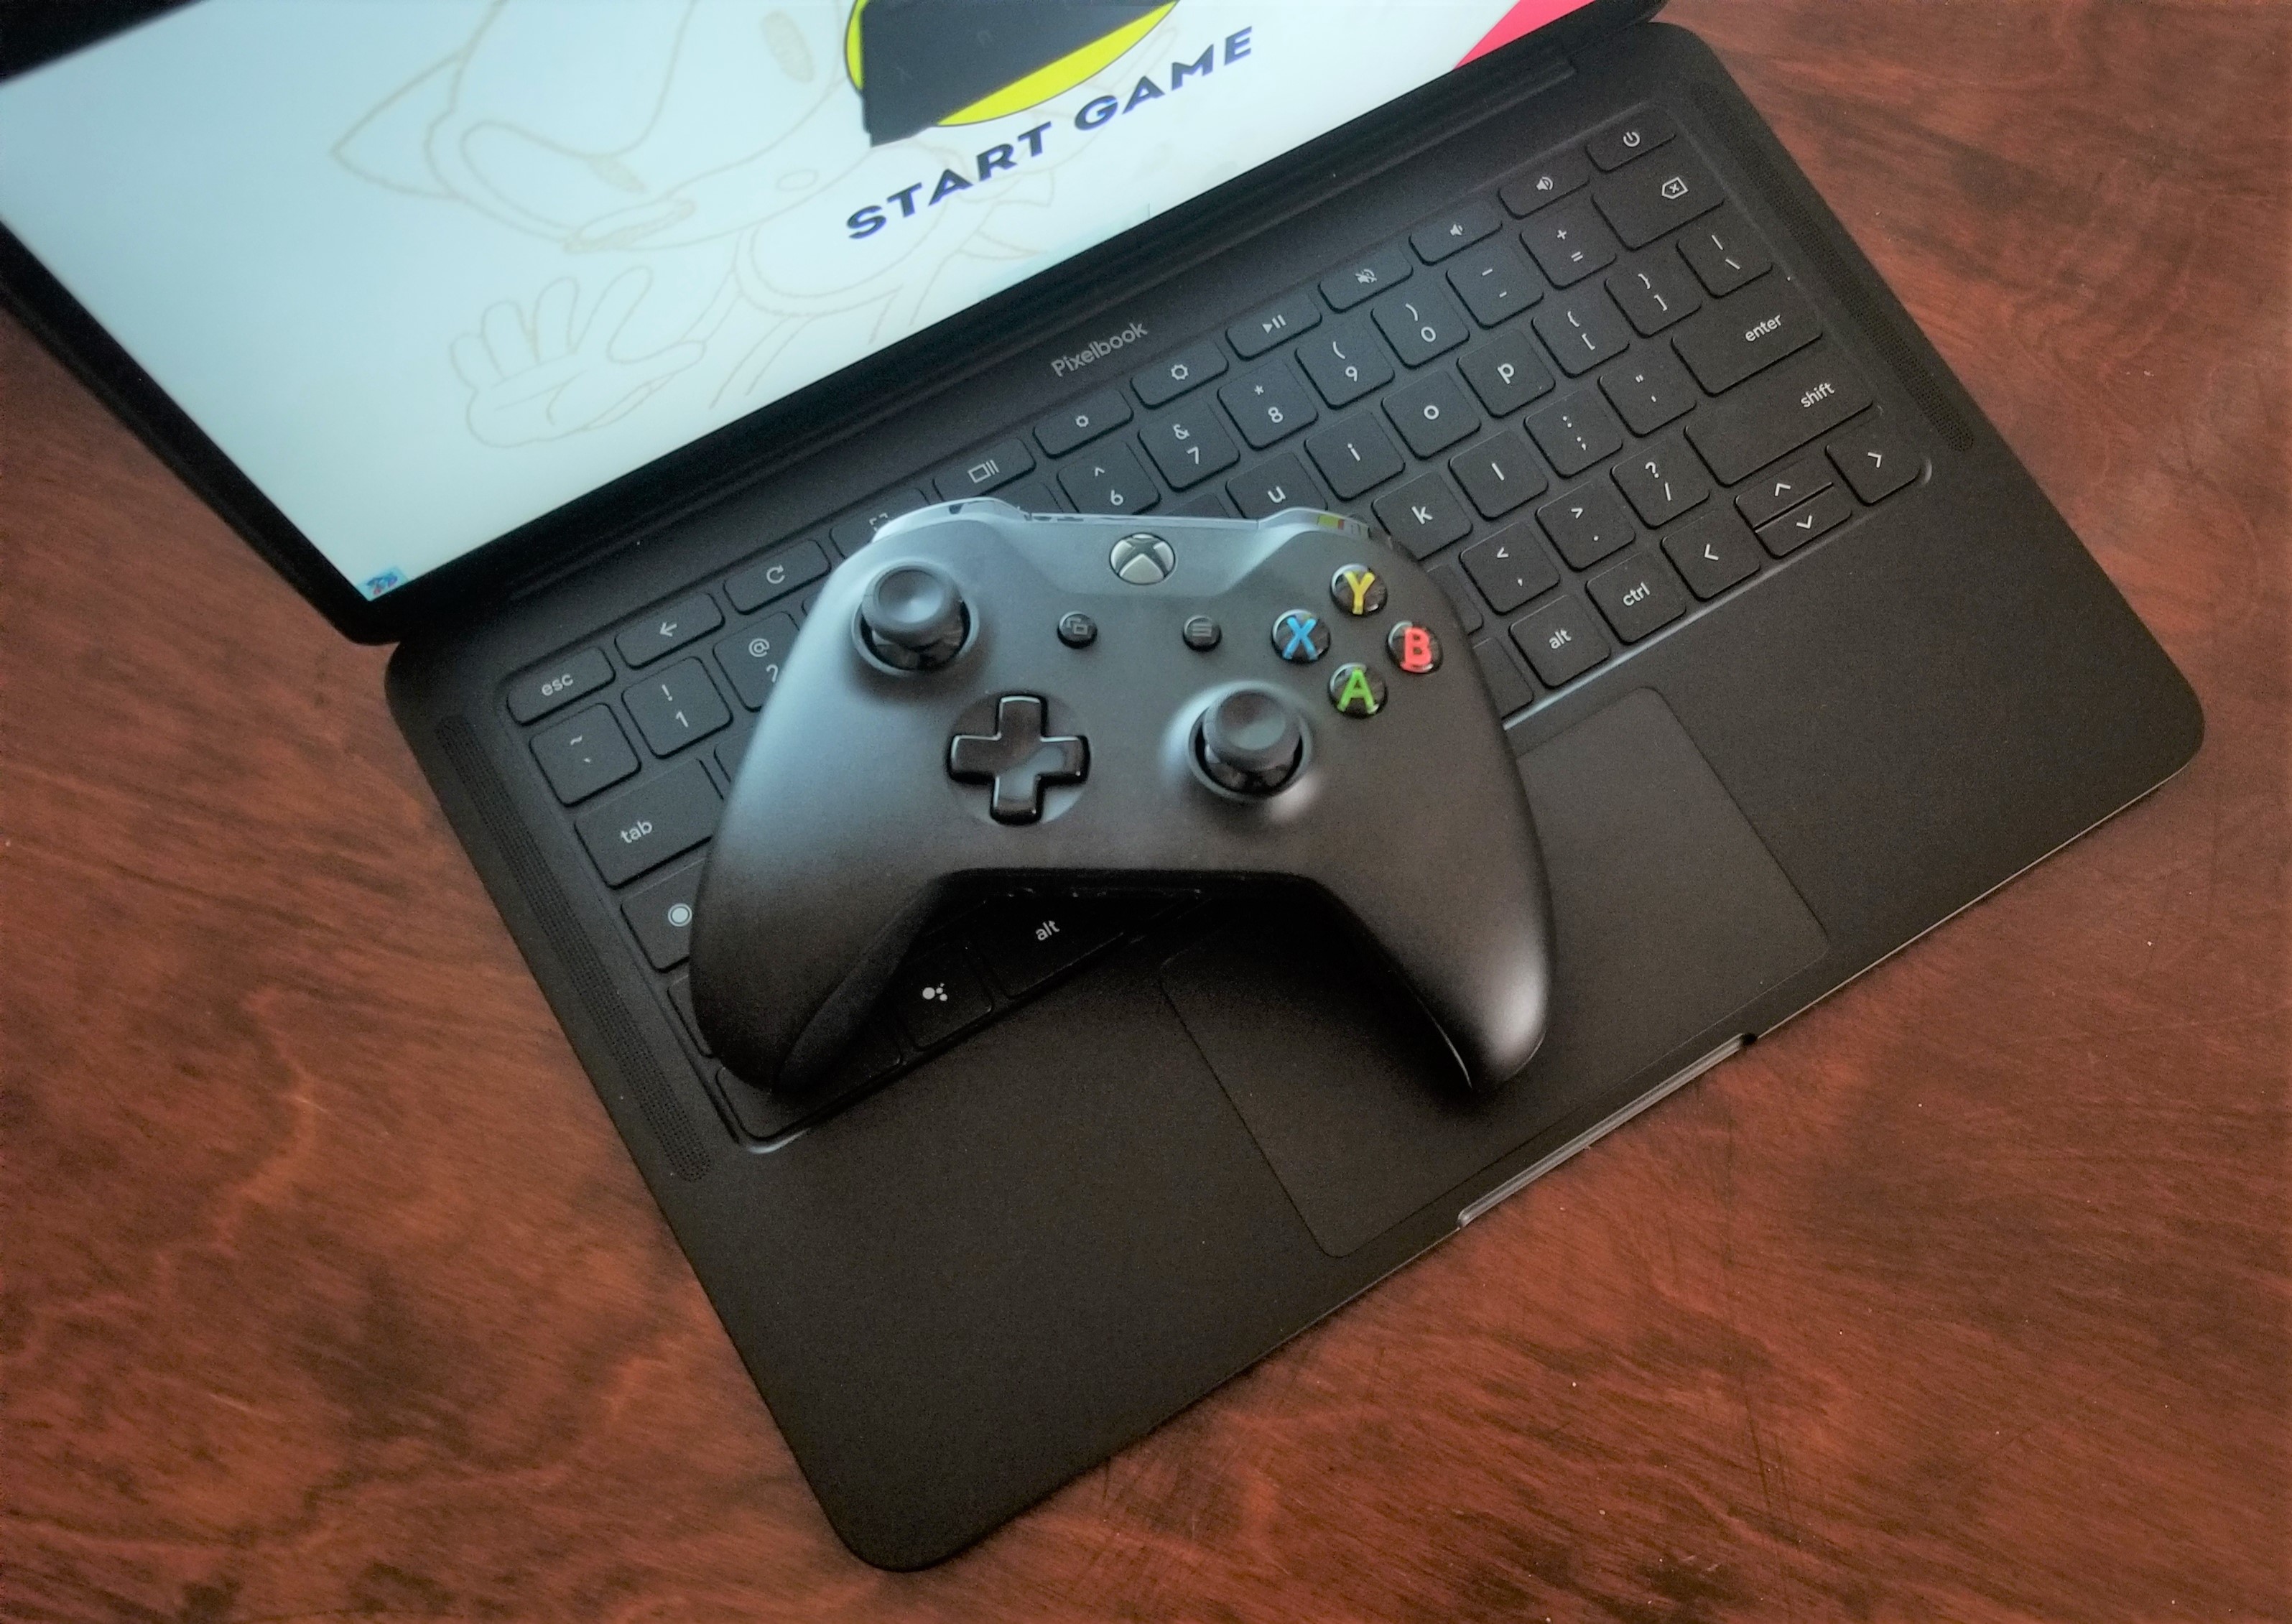 10 Best Free Games for Chromebook Users to Play